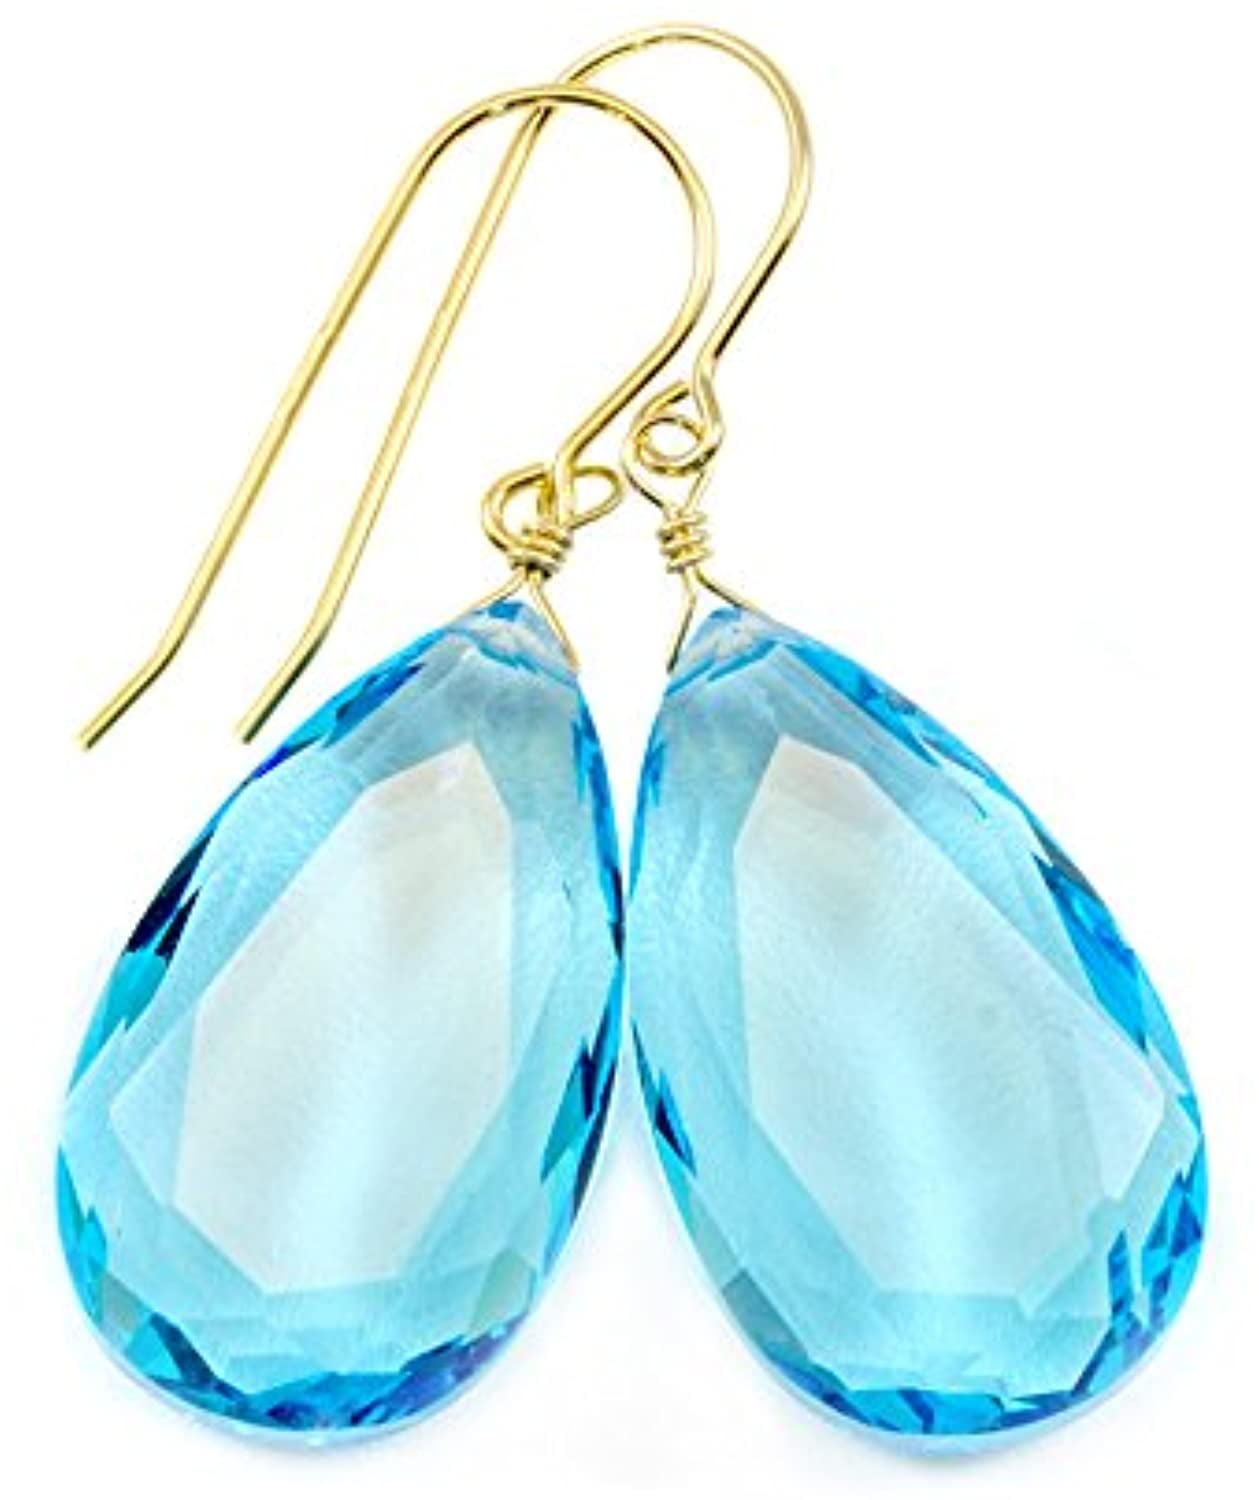 FACETED yellow ACRYLIC CRYSTAL BRIOLETTE SILVER PLATED DROP EARRINGS HOOK 